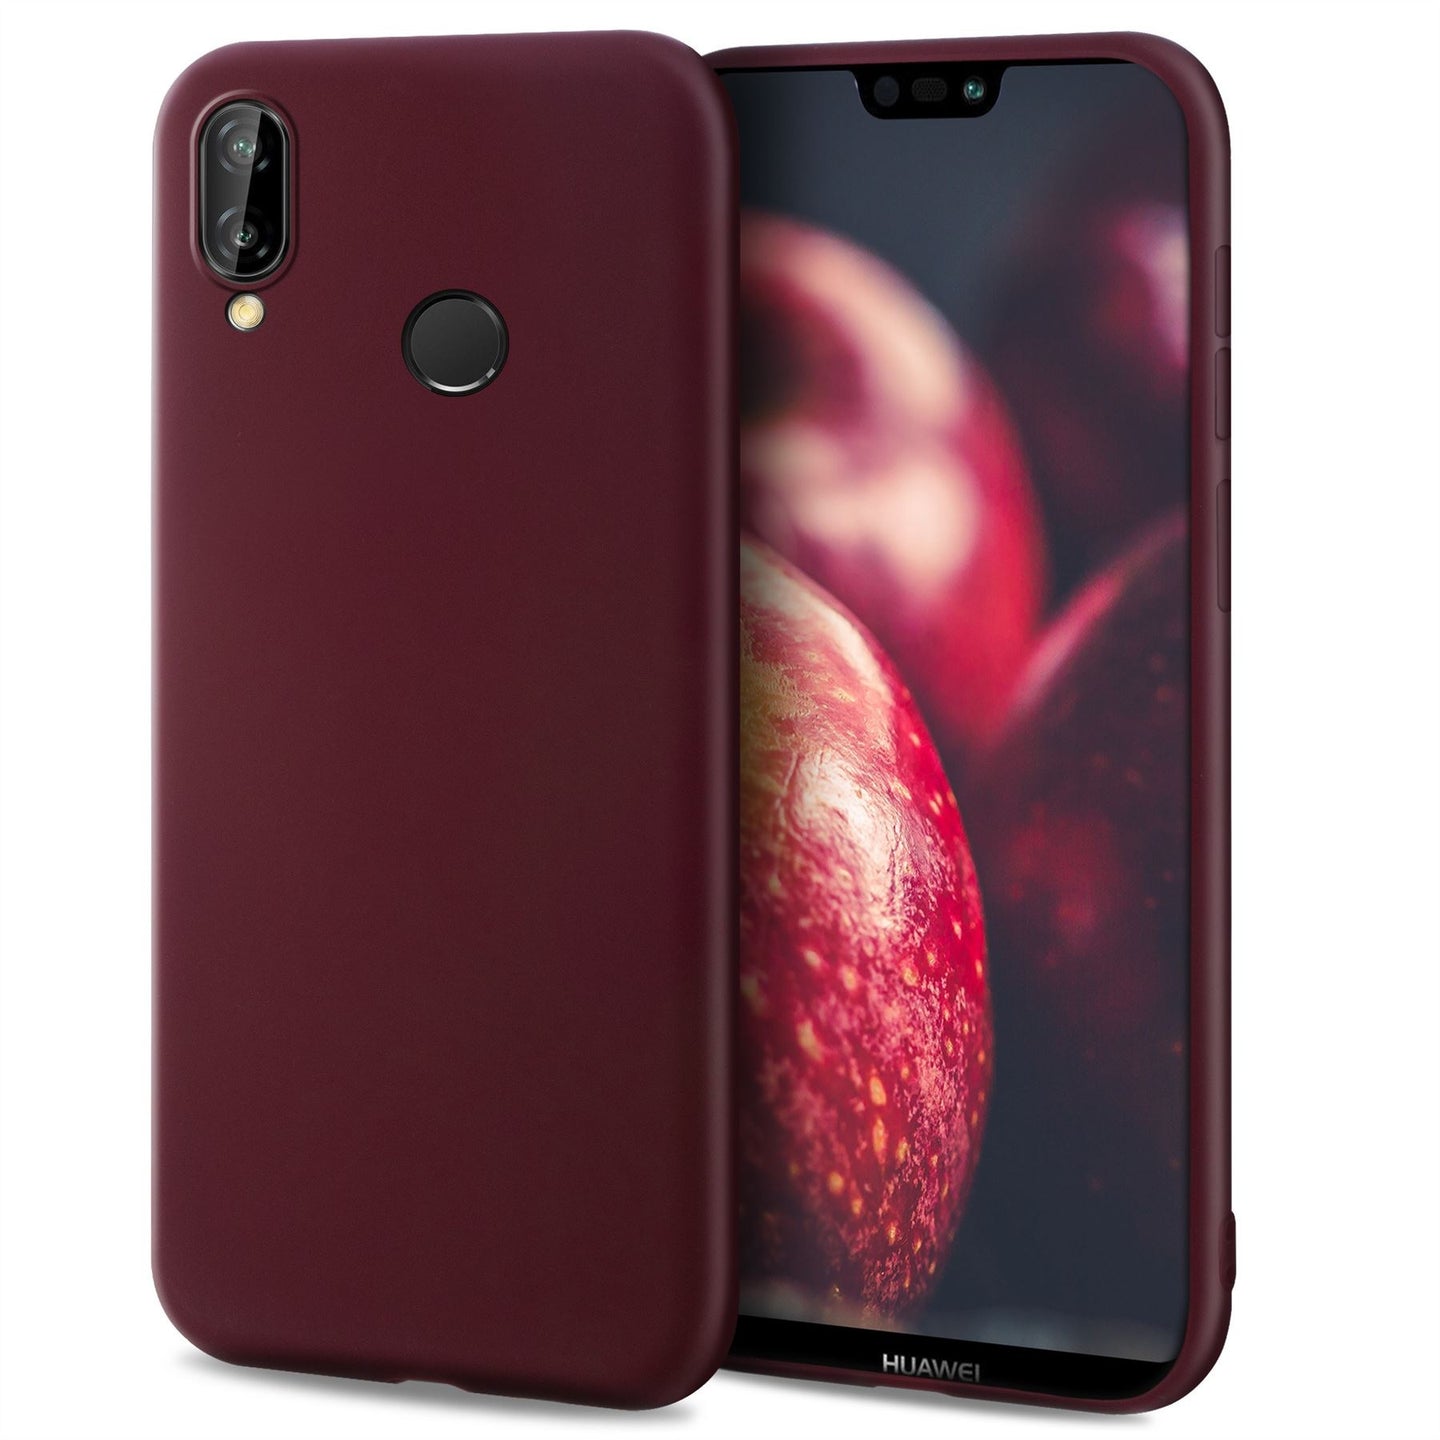 Moozy Minimalist Series Silicone Case for Huawei P20 Lite, Wine Red - Matte Finish Slim Soft TPU Cover